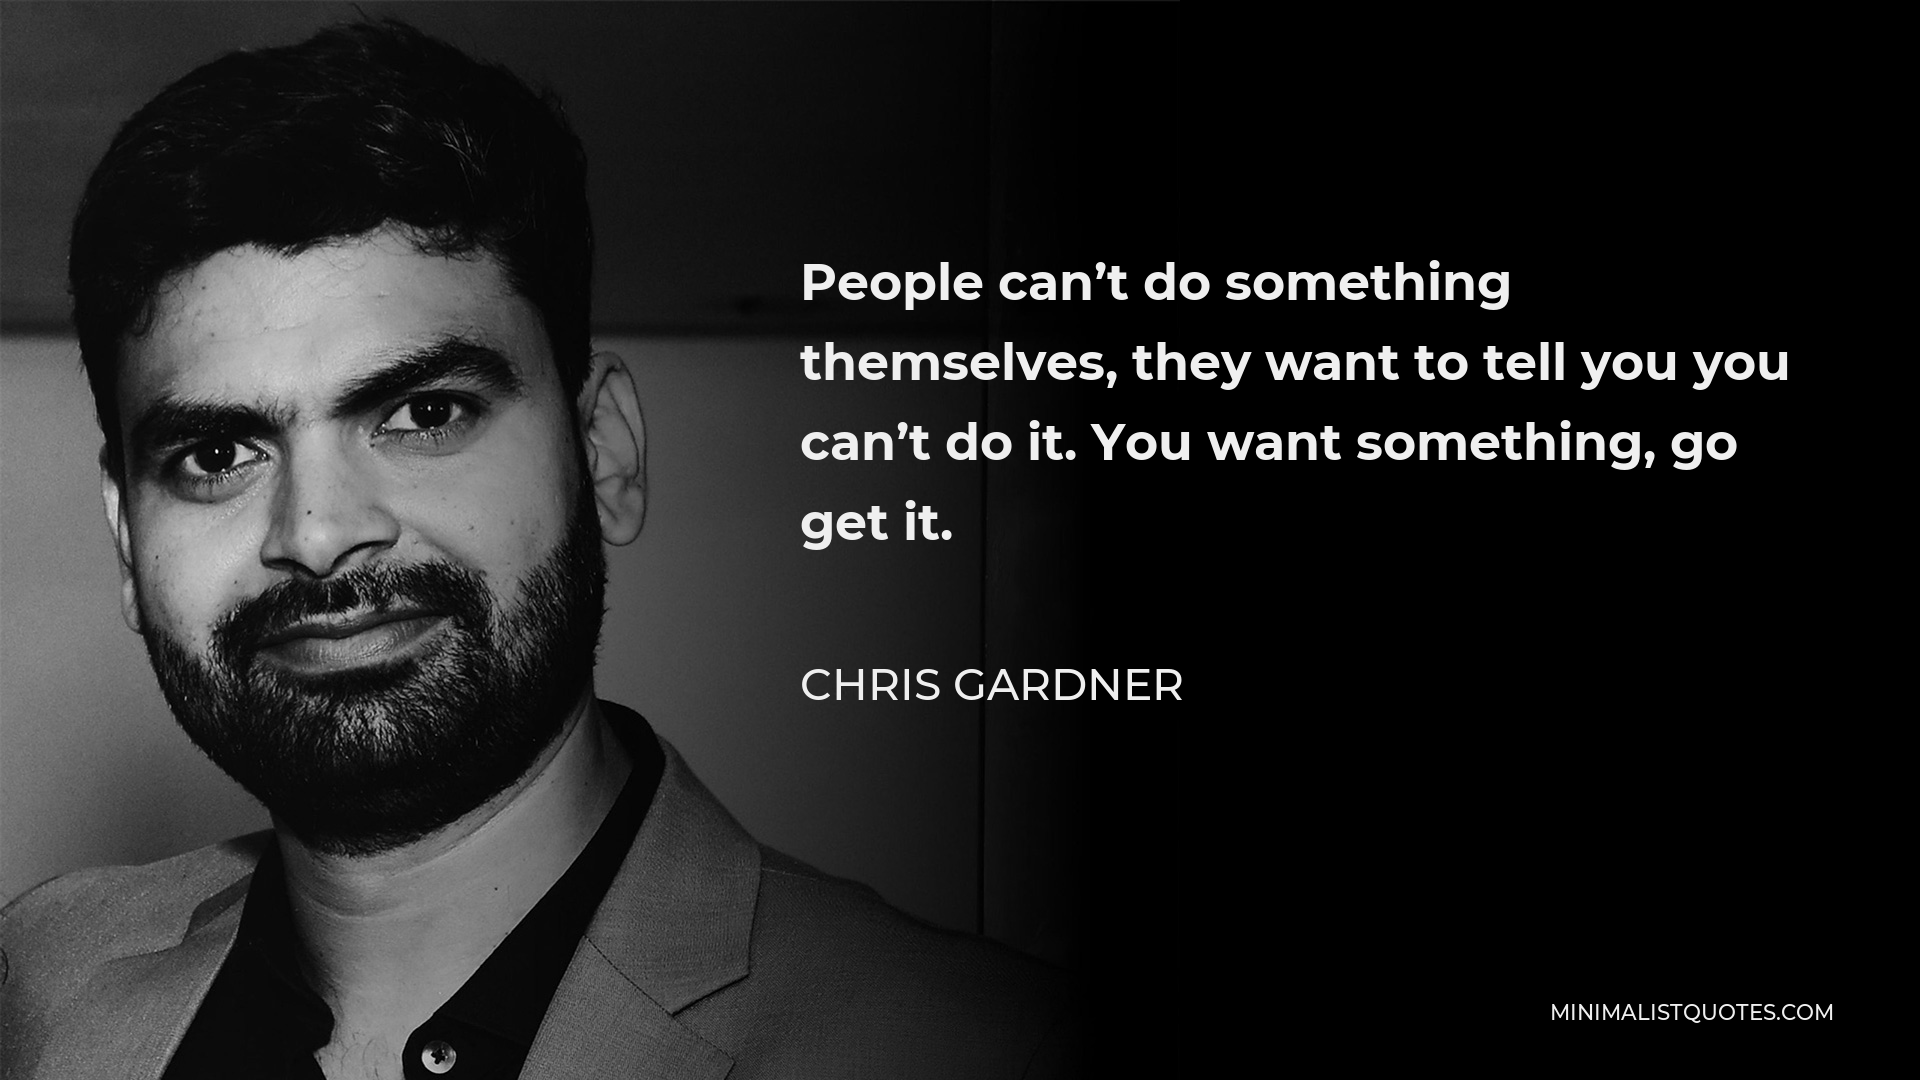 Chris Gardner Quote - People can’t do something themselves, they want to tell you you can’t do it. You want something, go get it.